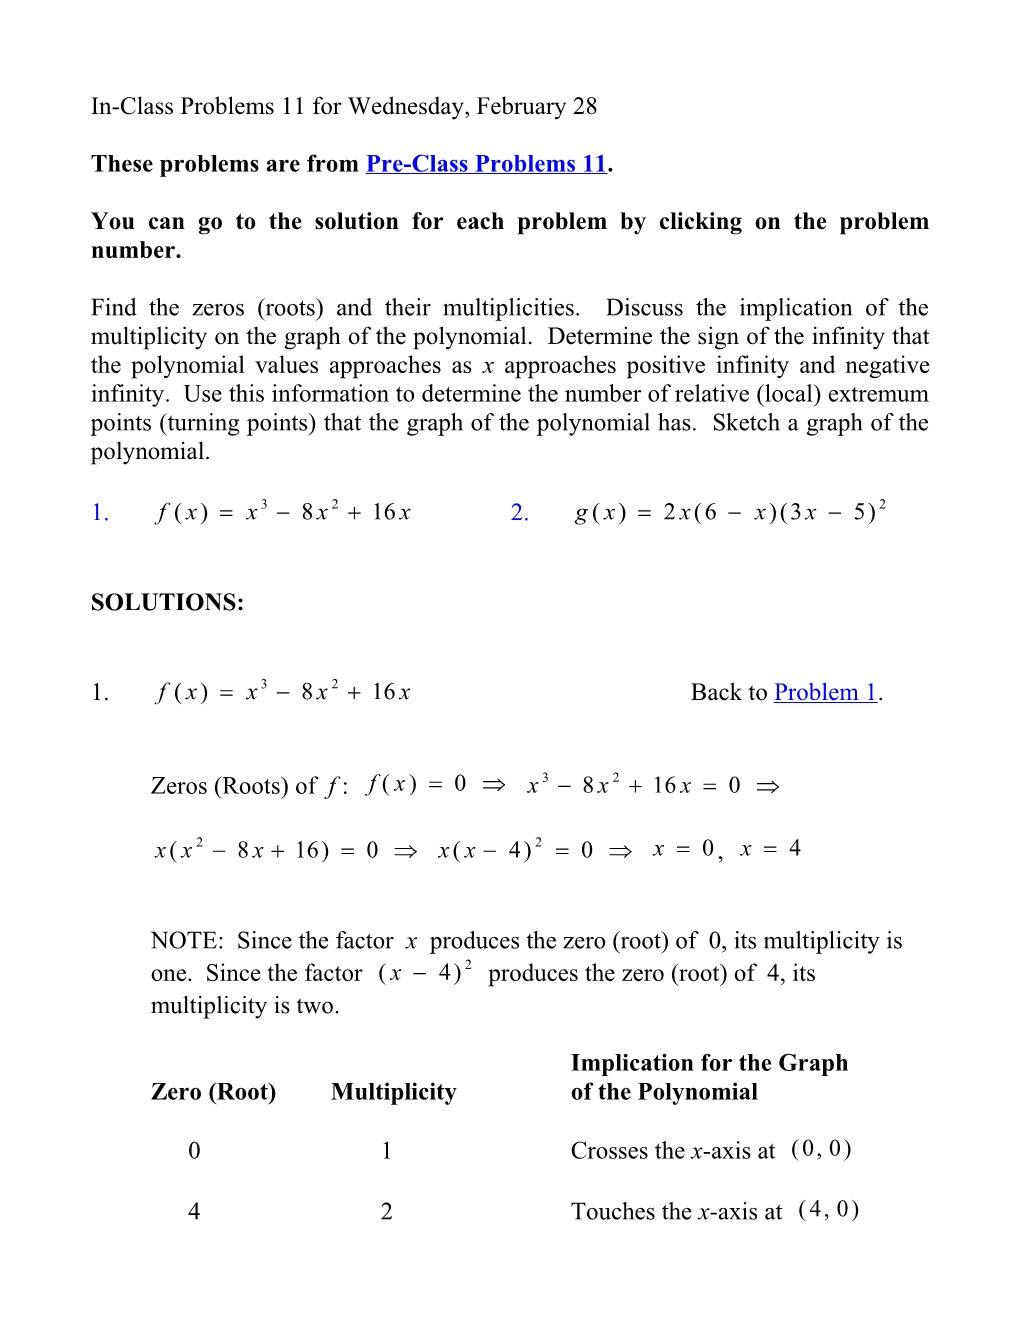 These Problems Are from Pre-Class Problems 11